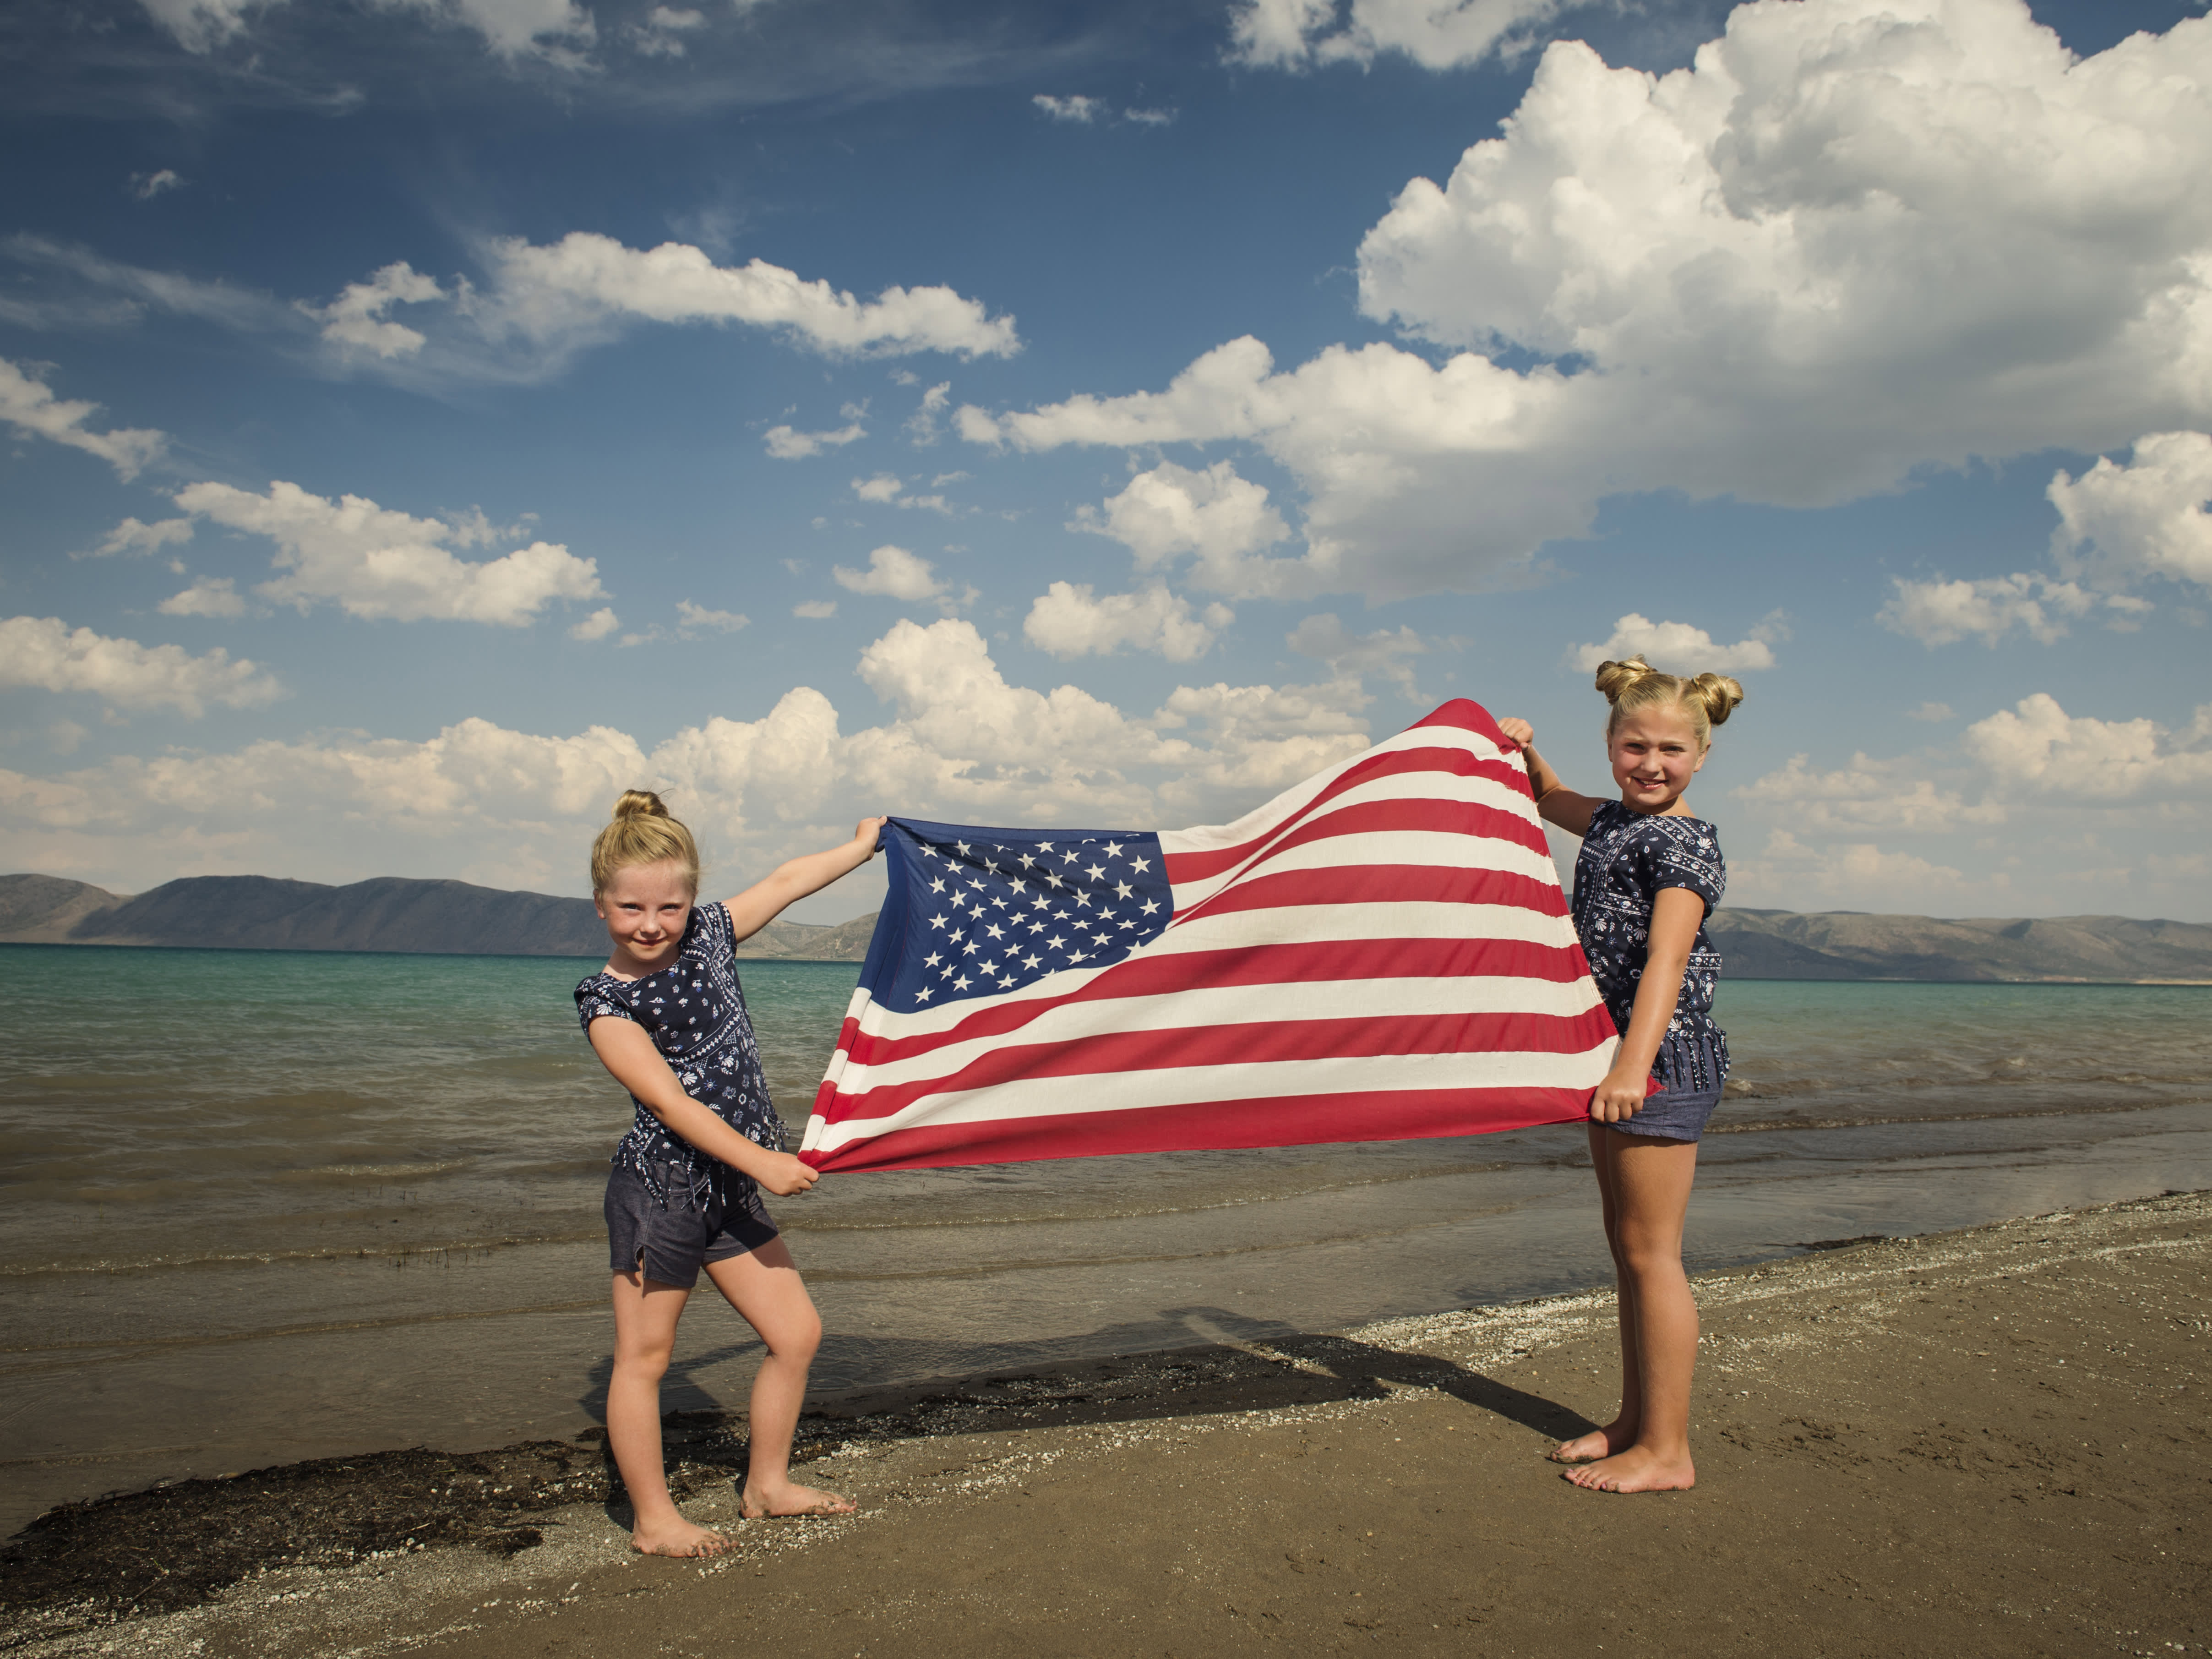 As travel nears pre-pandemic levels, coasts draw July 4 vacationers